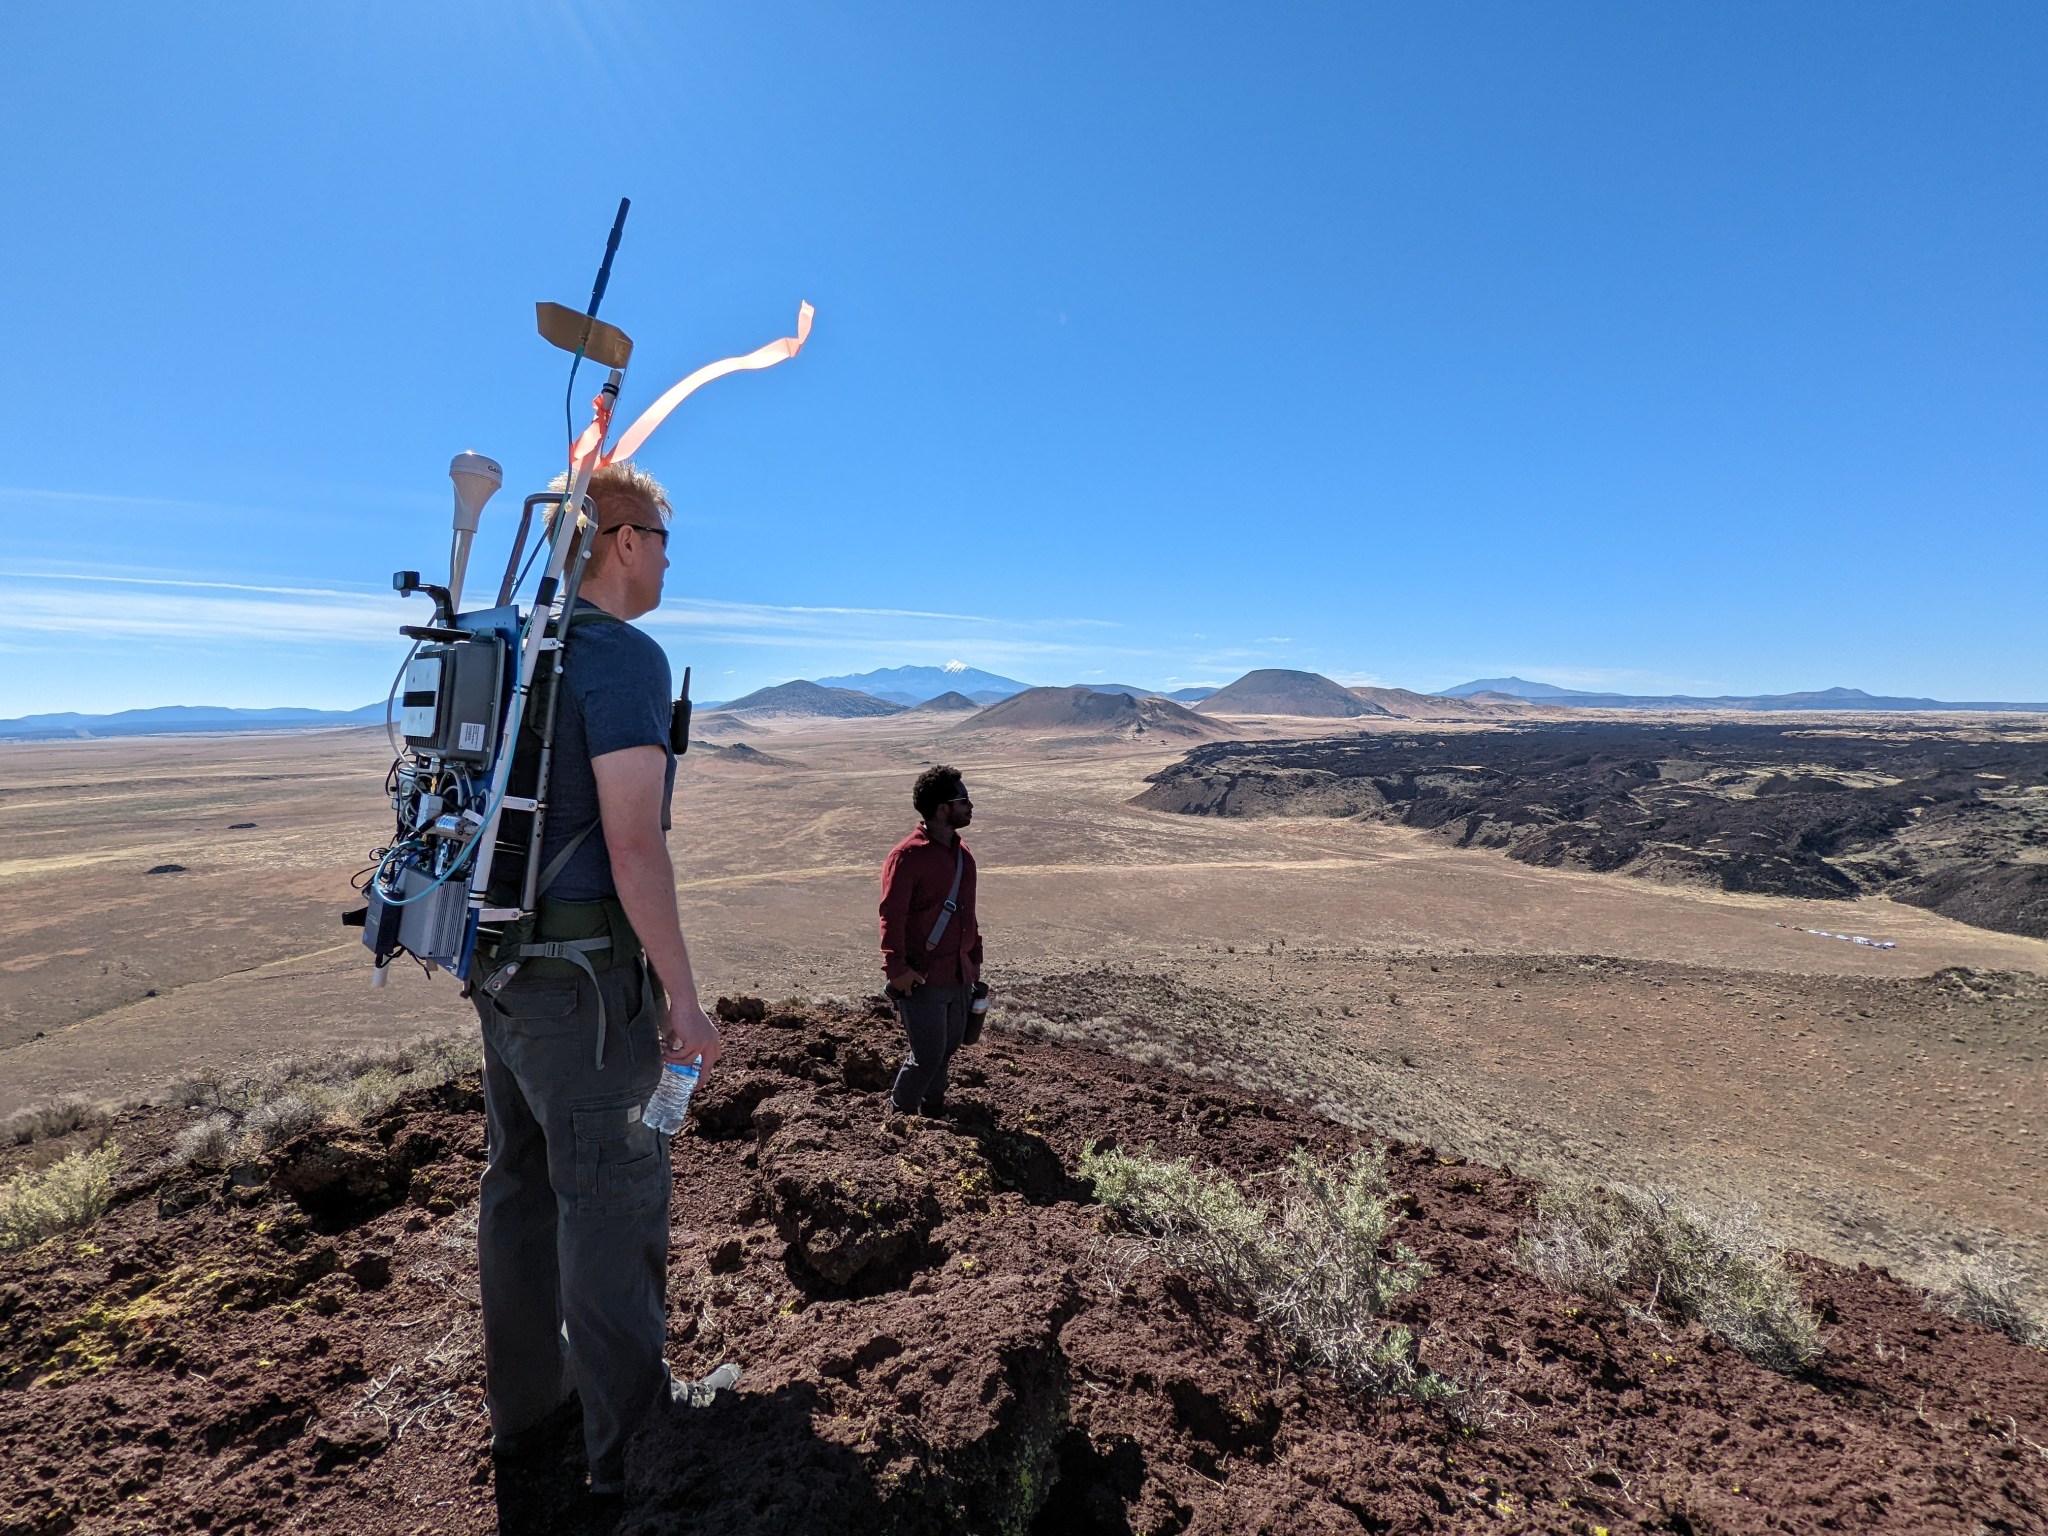 Two men standing in the desert, one is in the background nearly in silhouette, and one in the foreground has some test equipment loaded on a back pack. Both look into the distance to the right of the frame. Blue sky and mountains in the distance. 